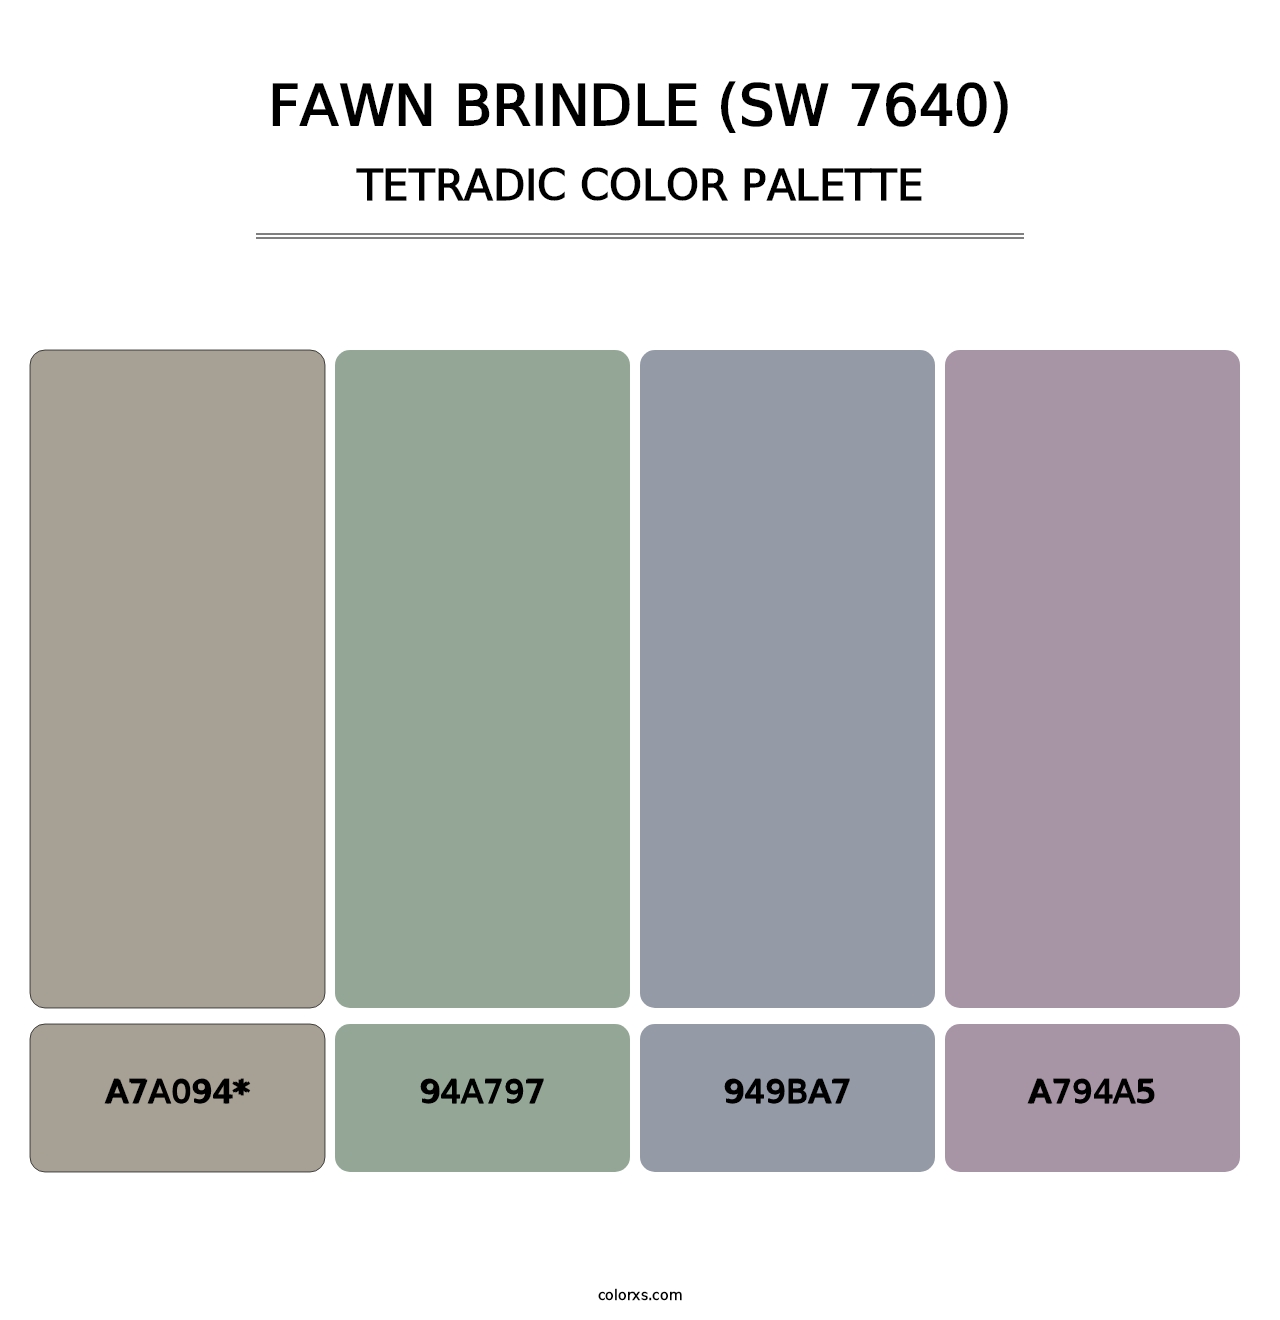 Fawn Brindle (SW 7640) - Tetradic Color Palette